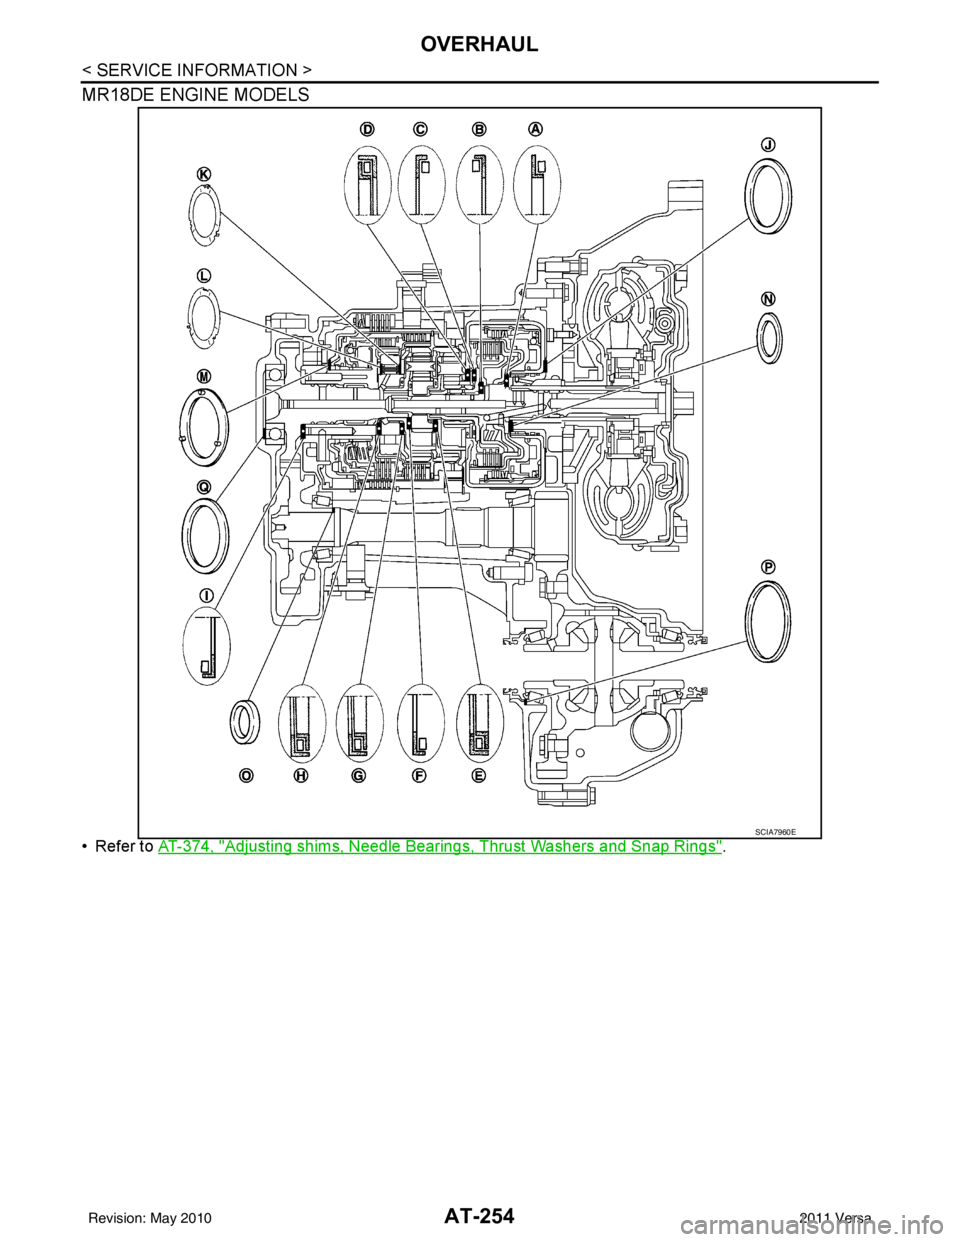 NISSAN LATIO 2011  Service Repair Manual AT-254
< SERVICE INFORMATION >
OVERHAUL
MR18DE ENGINE MODELS
• Refer to AT-374, "Adjusting shims, Needle Bearings, Thrust Washers and Snap Rings".
SCIA7960E
Revision: May 2010 2011 Versa 